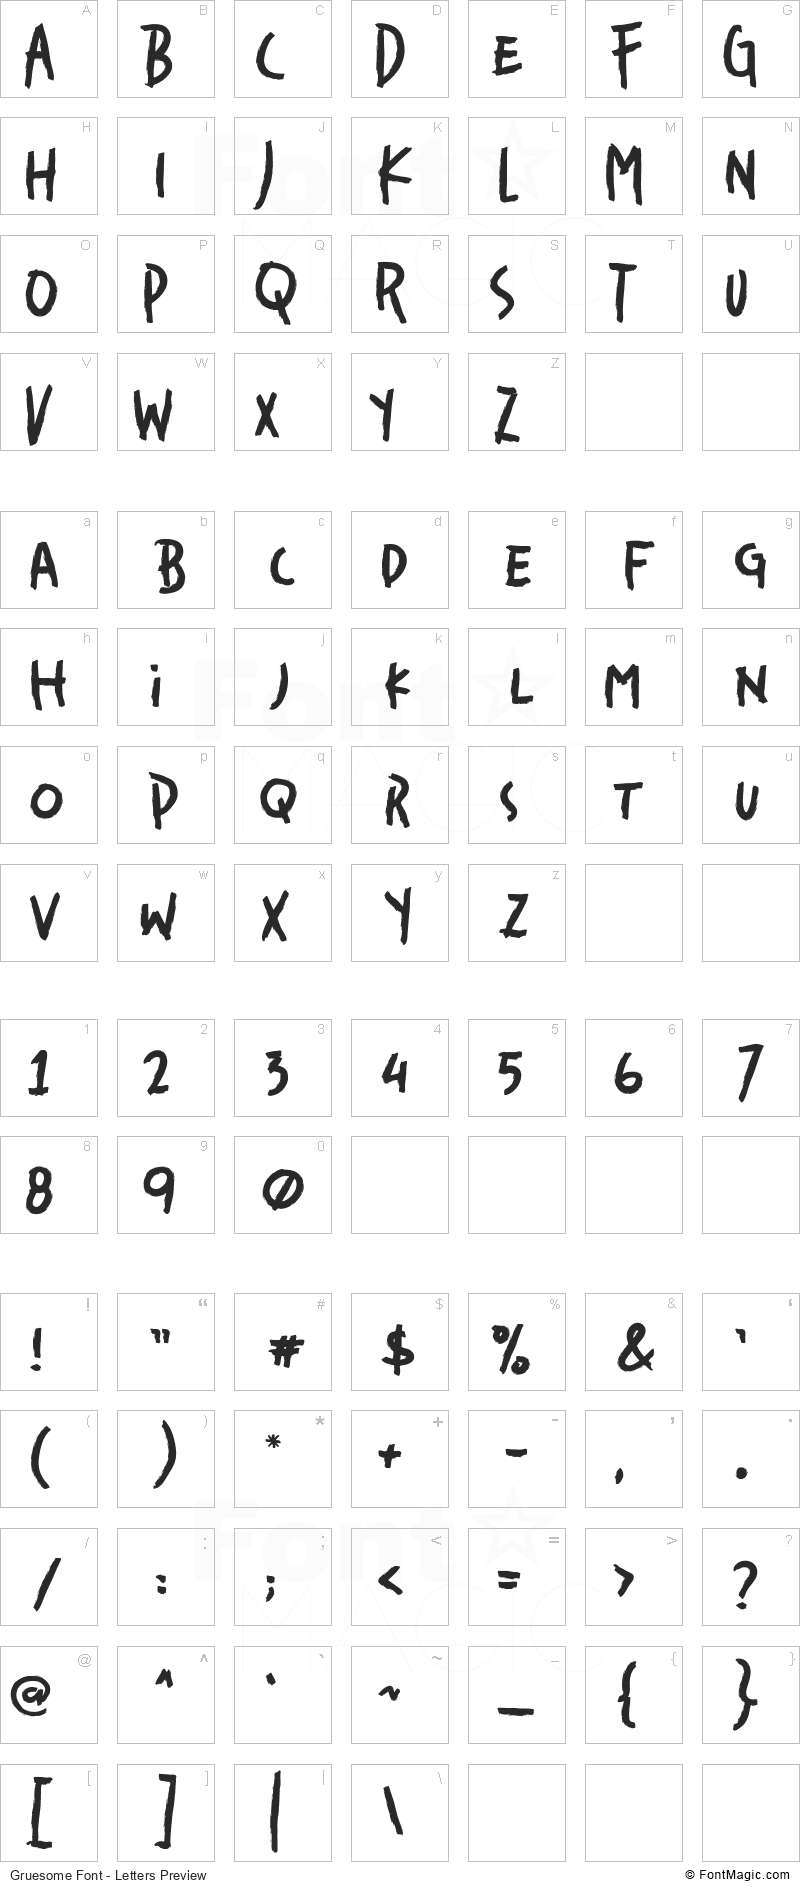 Gruesome Font - All Latters Preview Chart